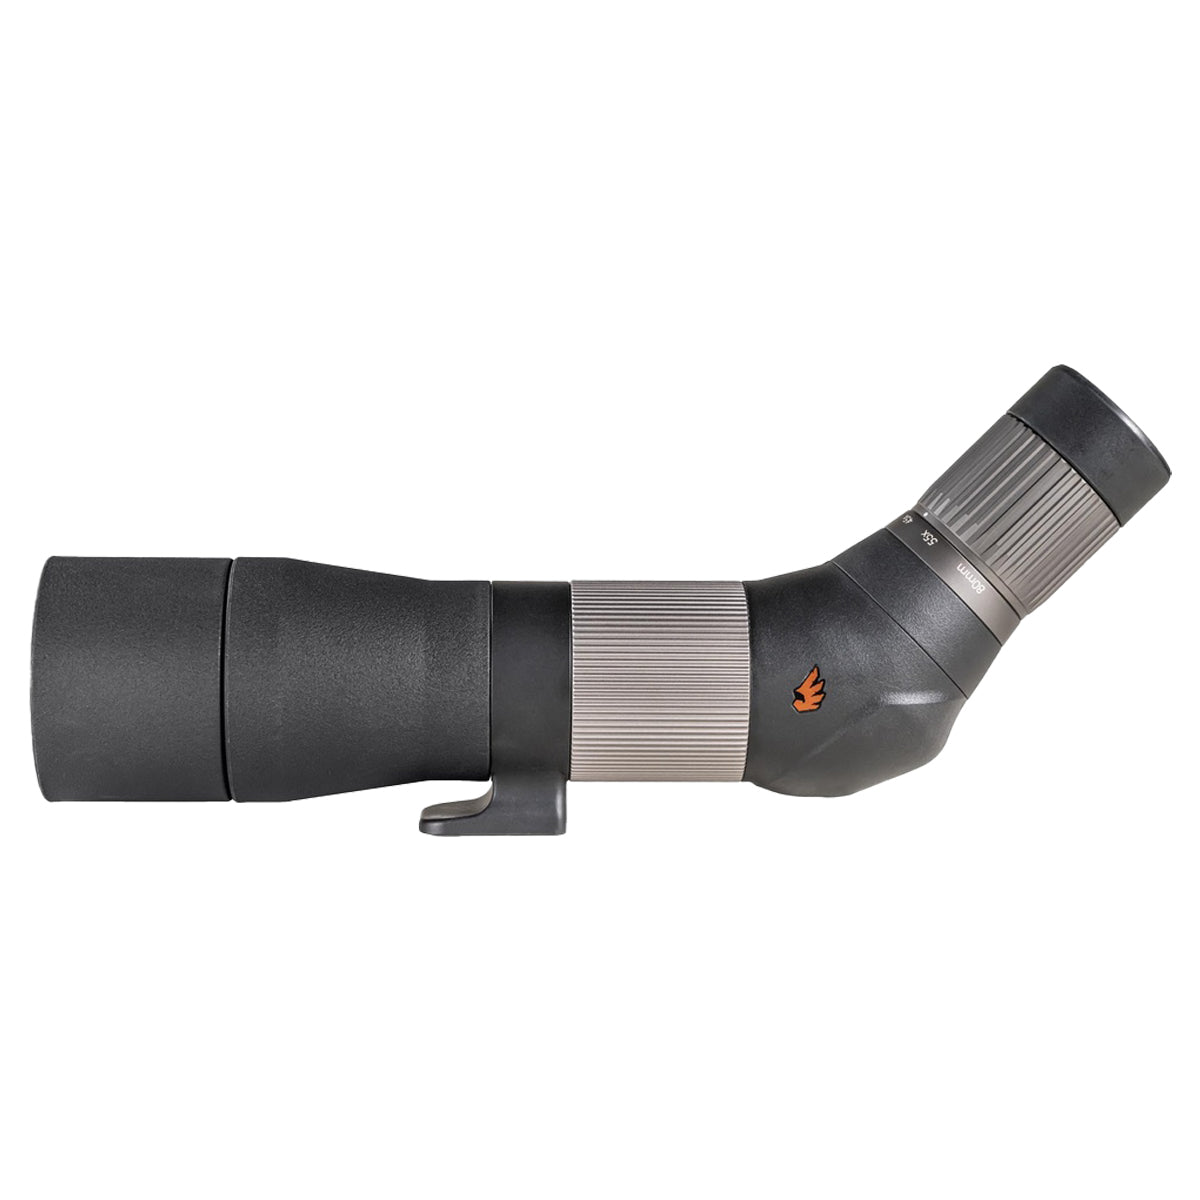 Revic Acura S65a Angled Spotting Scope